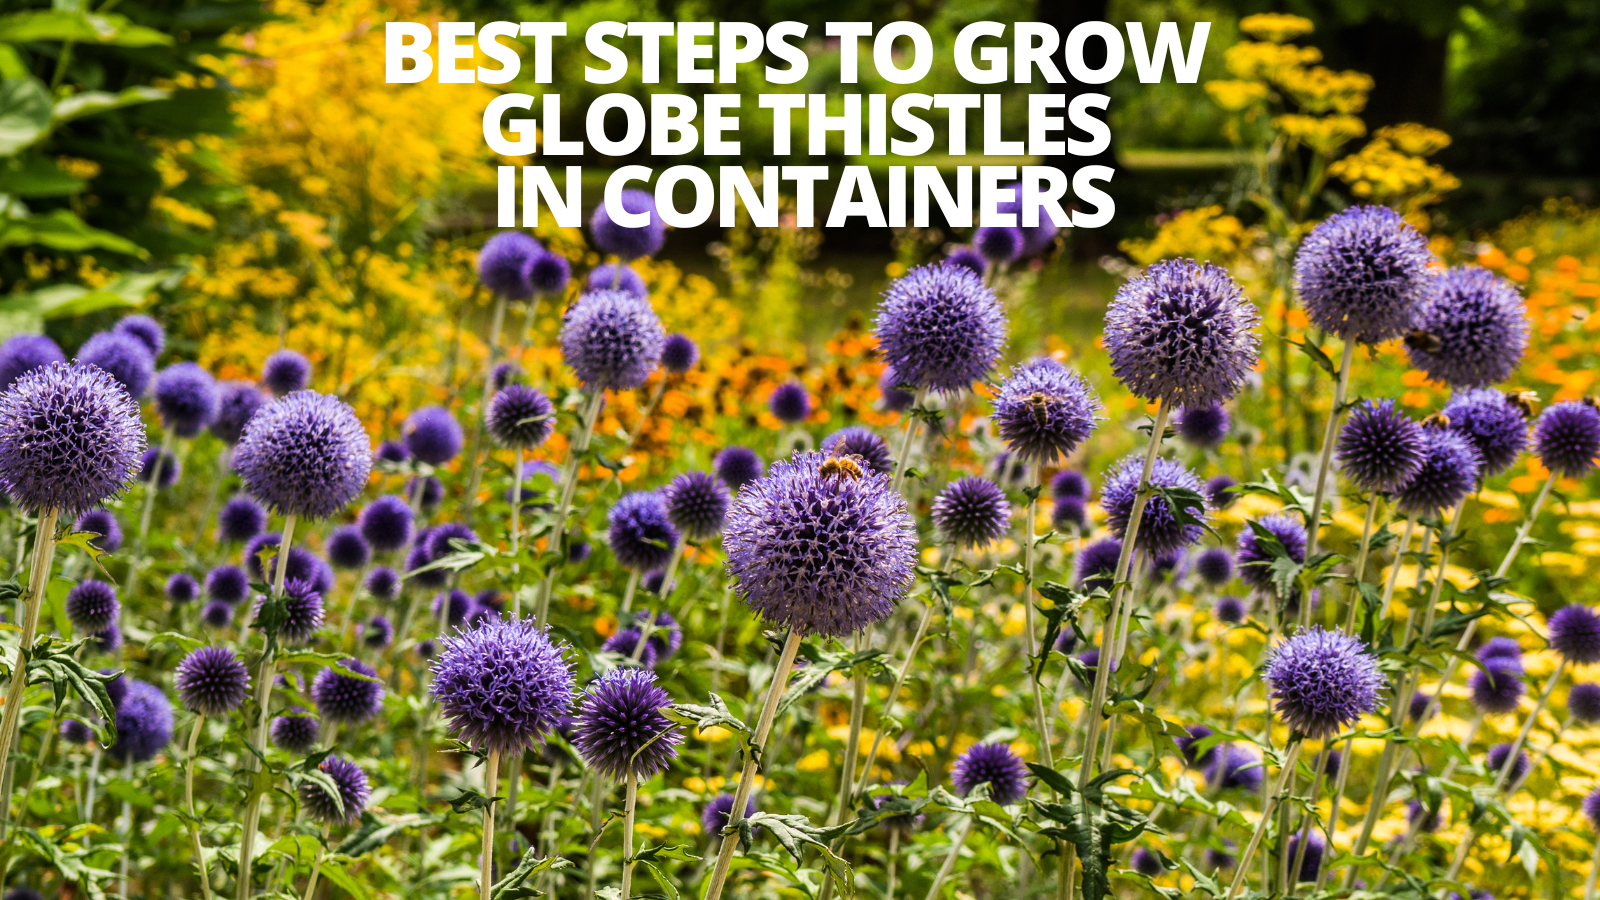 Best Steps To Grow Globe Thistles In Containers